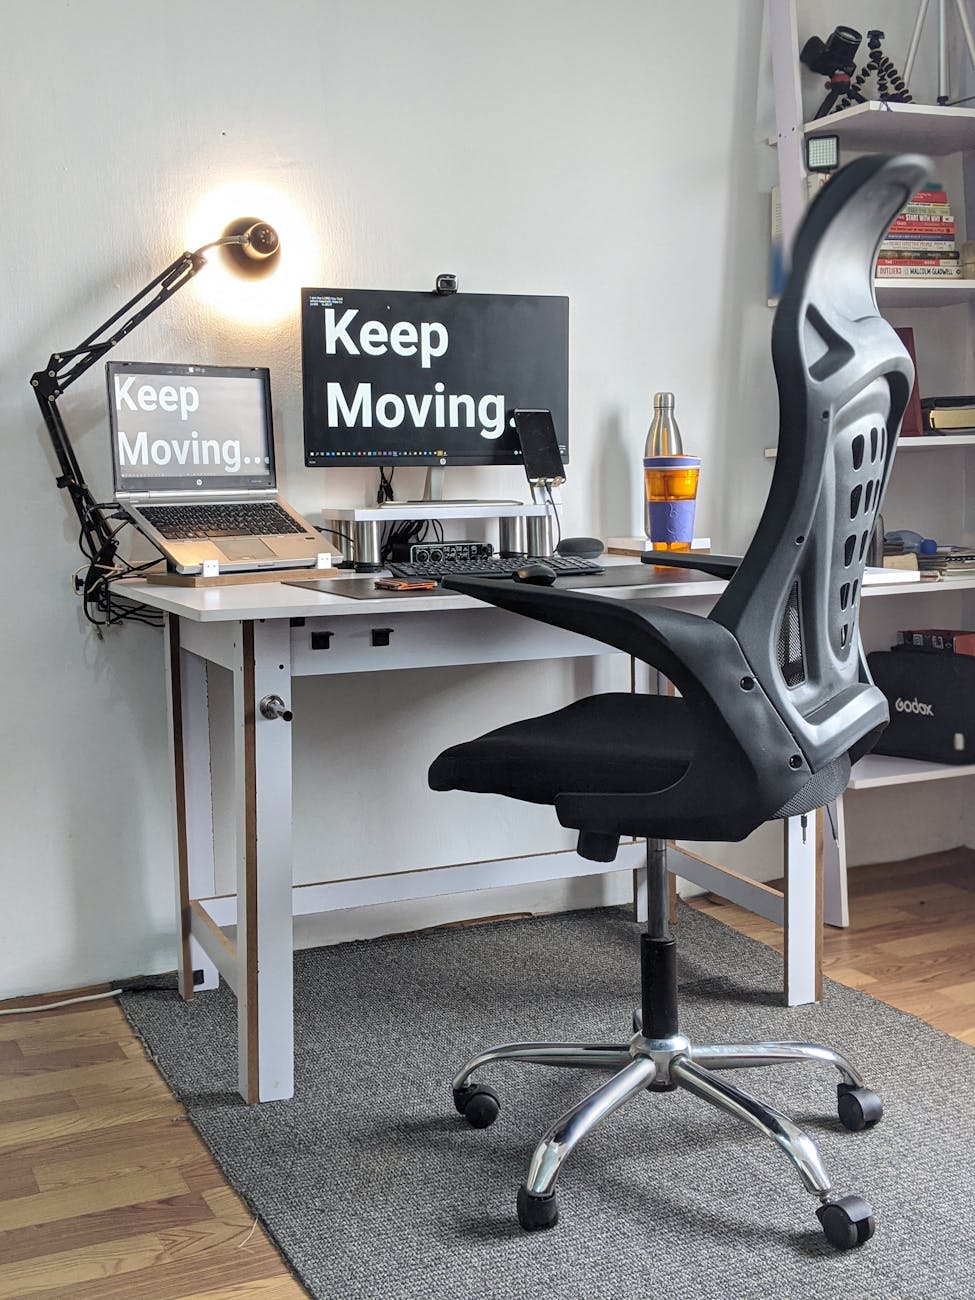 ergonomic office chair with a text screen saver that reads "keep moving"